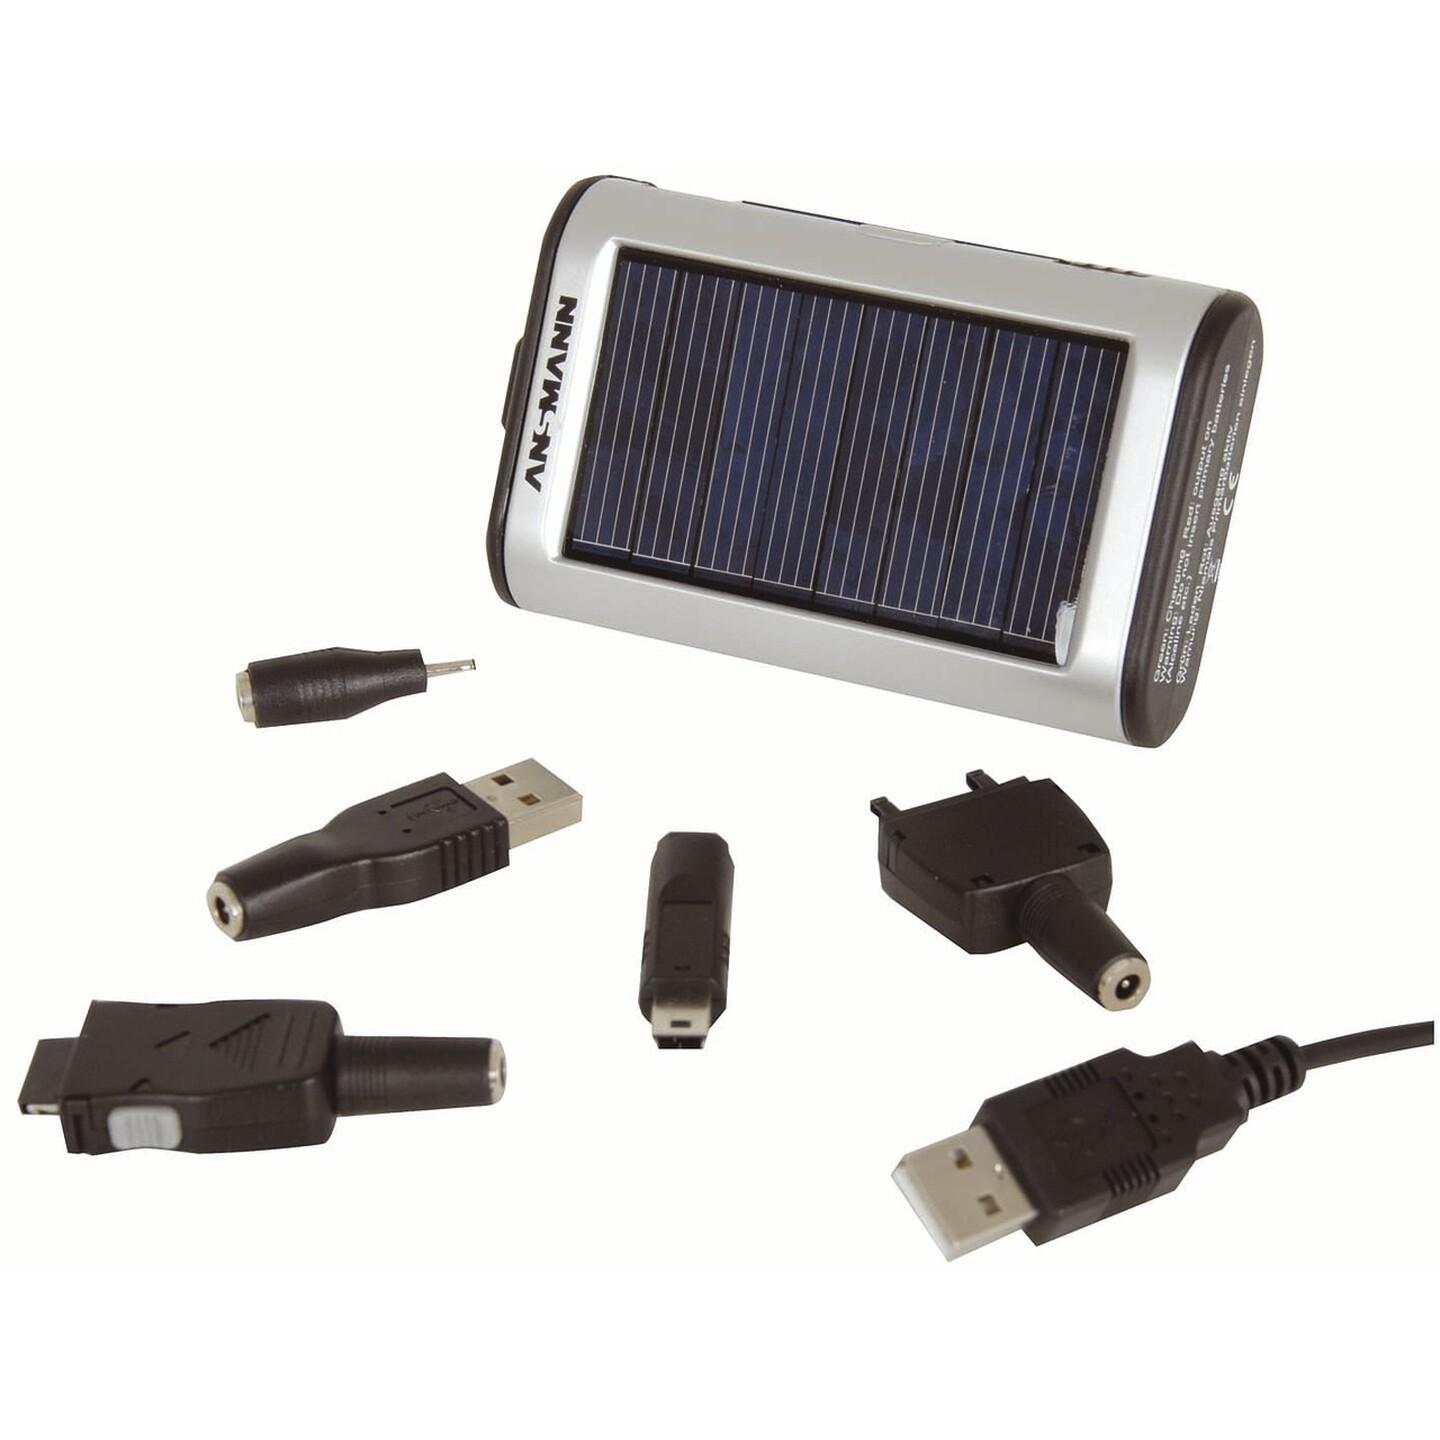 Solar Gadget and Mobile Phone Charger